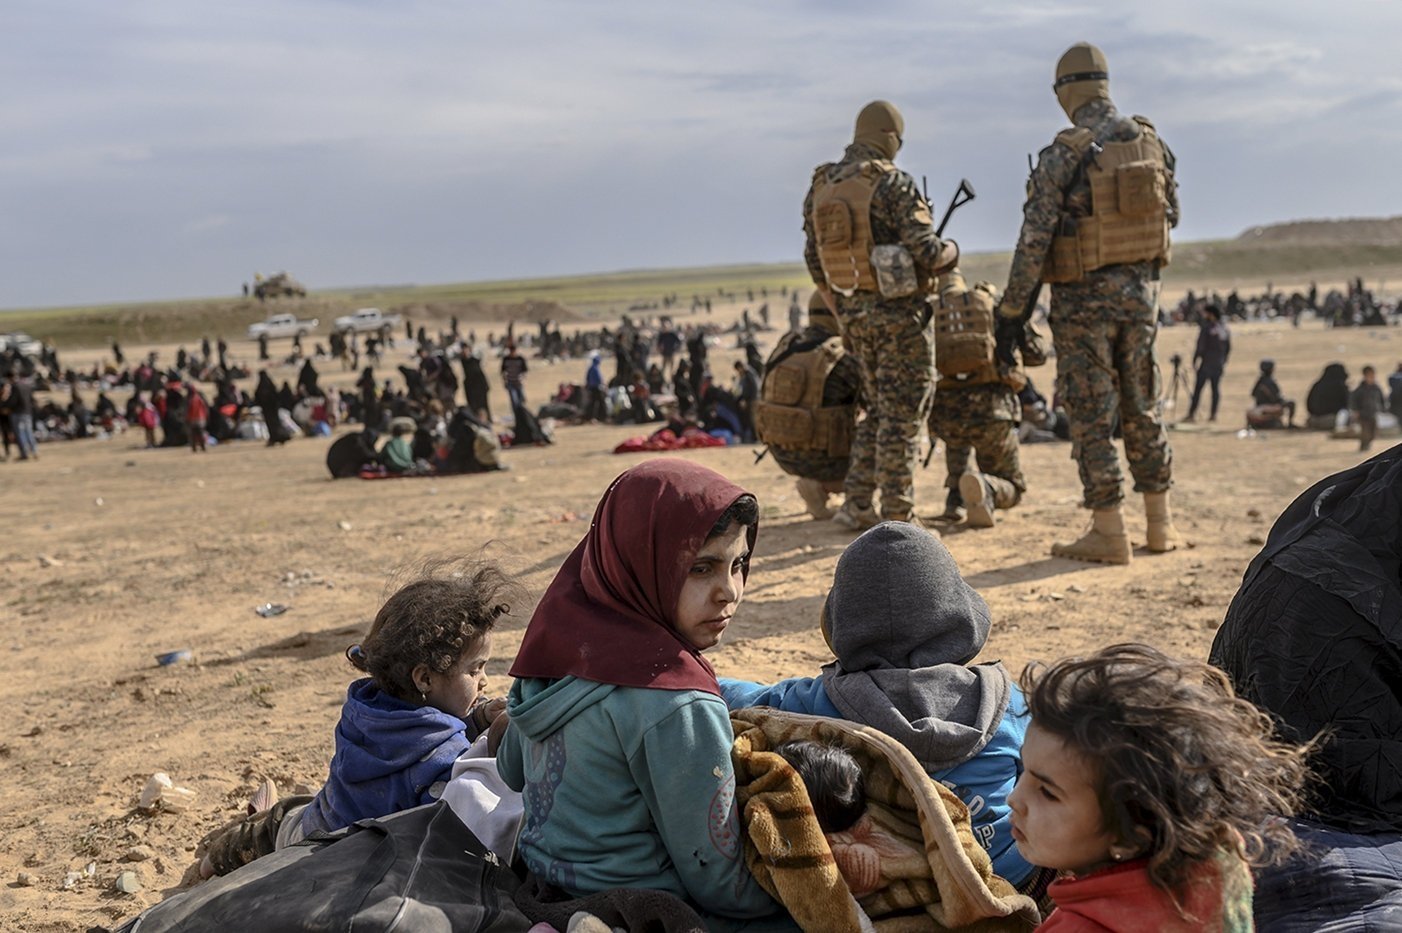 Civilians evacuated from the Daesh terrorist group's embattled holdout of Baghouz wait at a screening area held by the YPG terrorist group, in the northeastern Syrian province of Deir el-Zour, March 5, 2019. (AFP Photo)